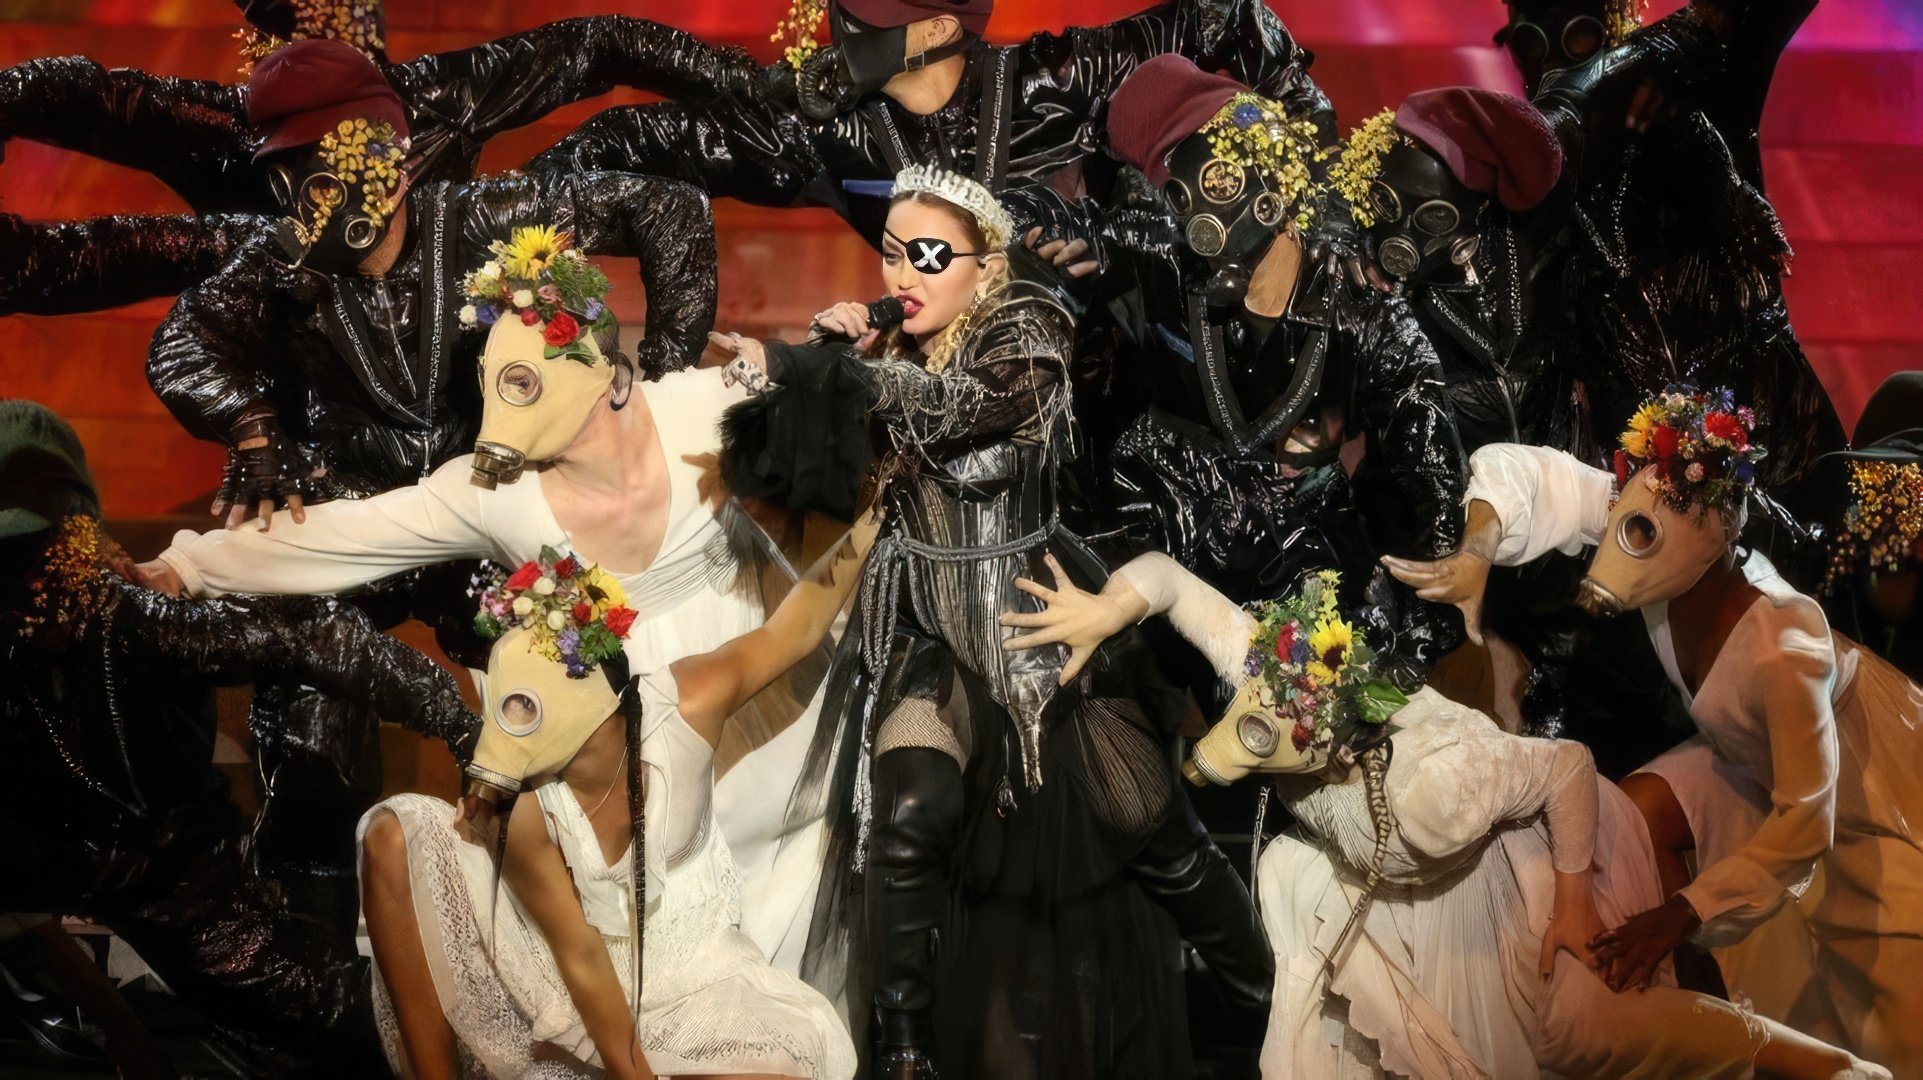 Madonna at Eurovision 2019 in Israel